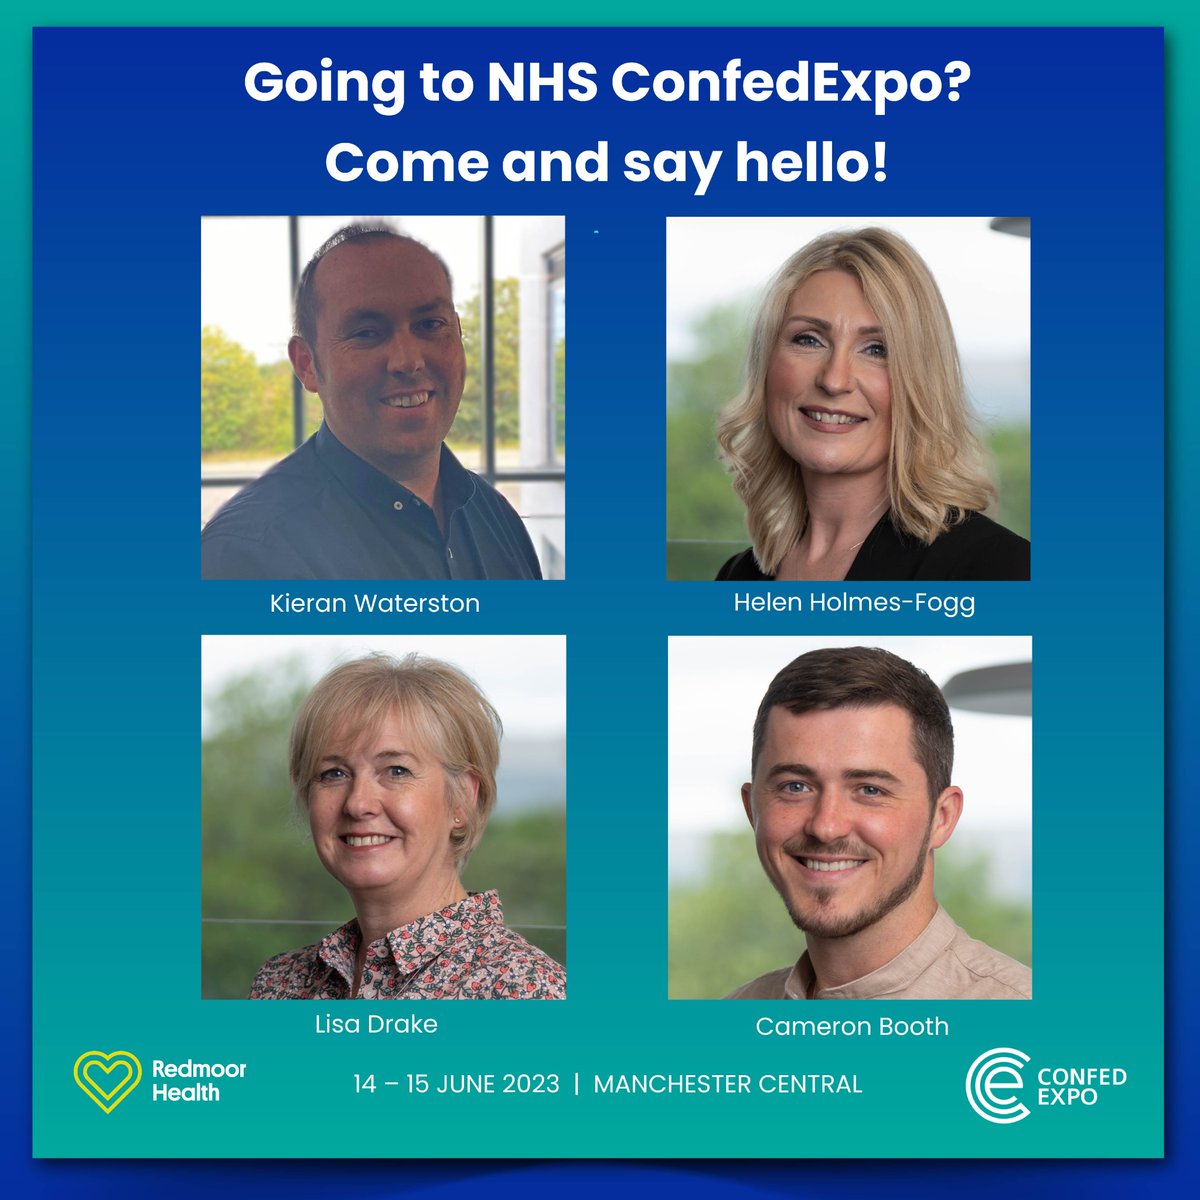 Don't miss out on the chance to meet the Redmoor Health team at the @confedexpo on June 14-15 in Manchester! Come visit us at stand D9. 

#NHSConfedExpo #PrimaryCare #GeneralPractice